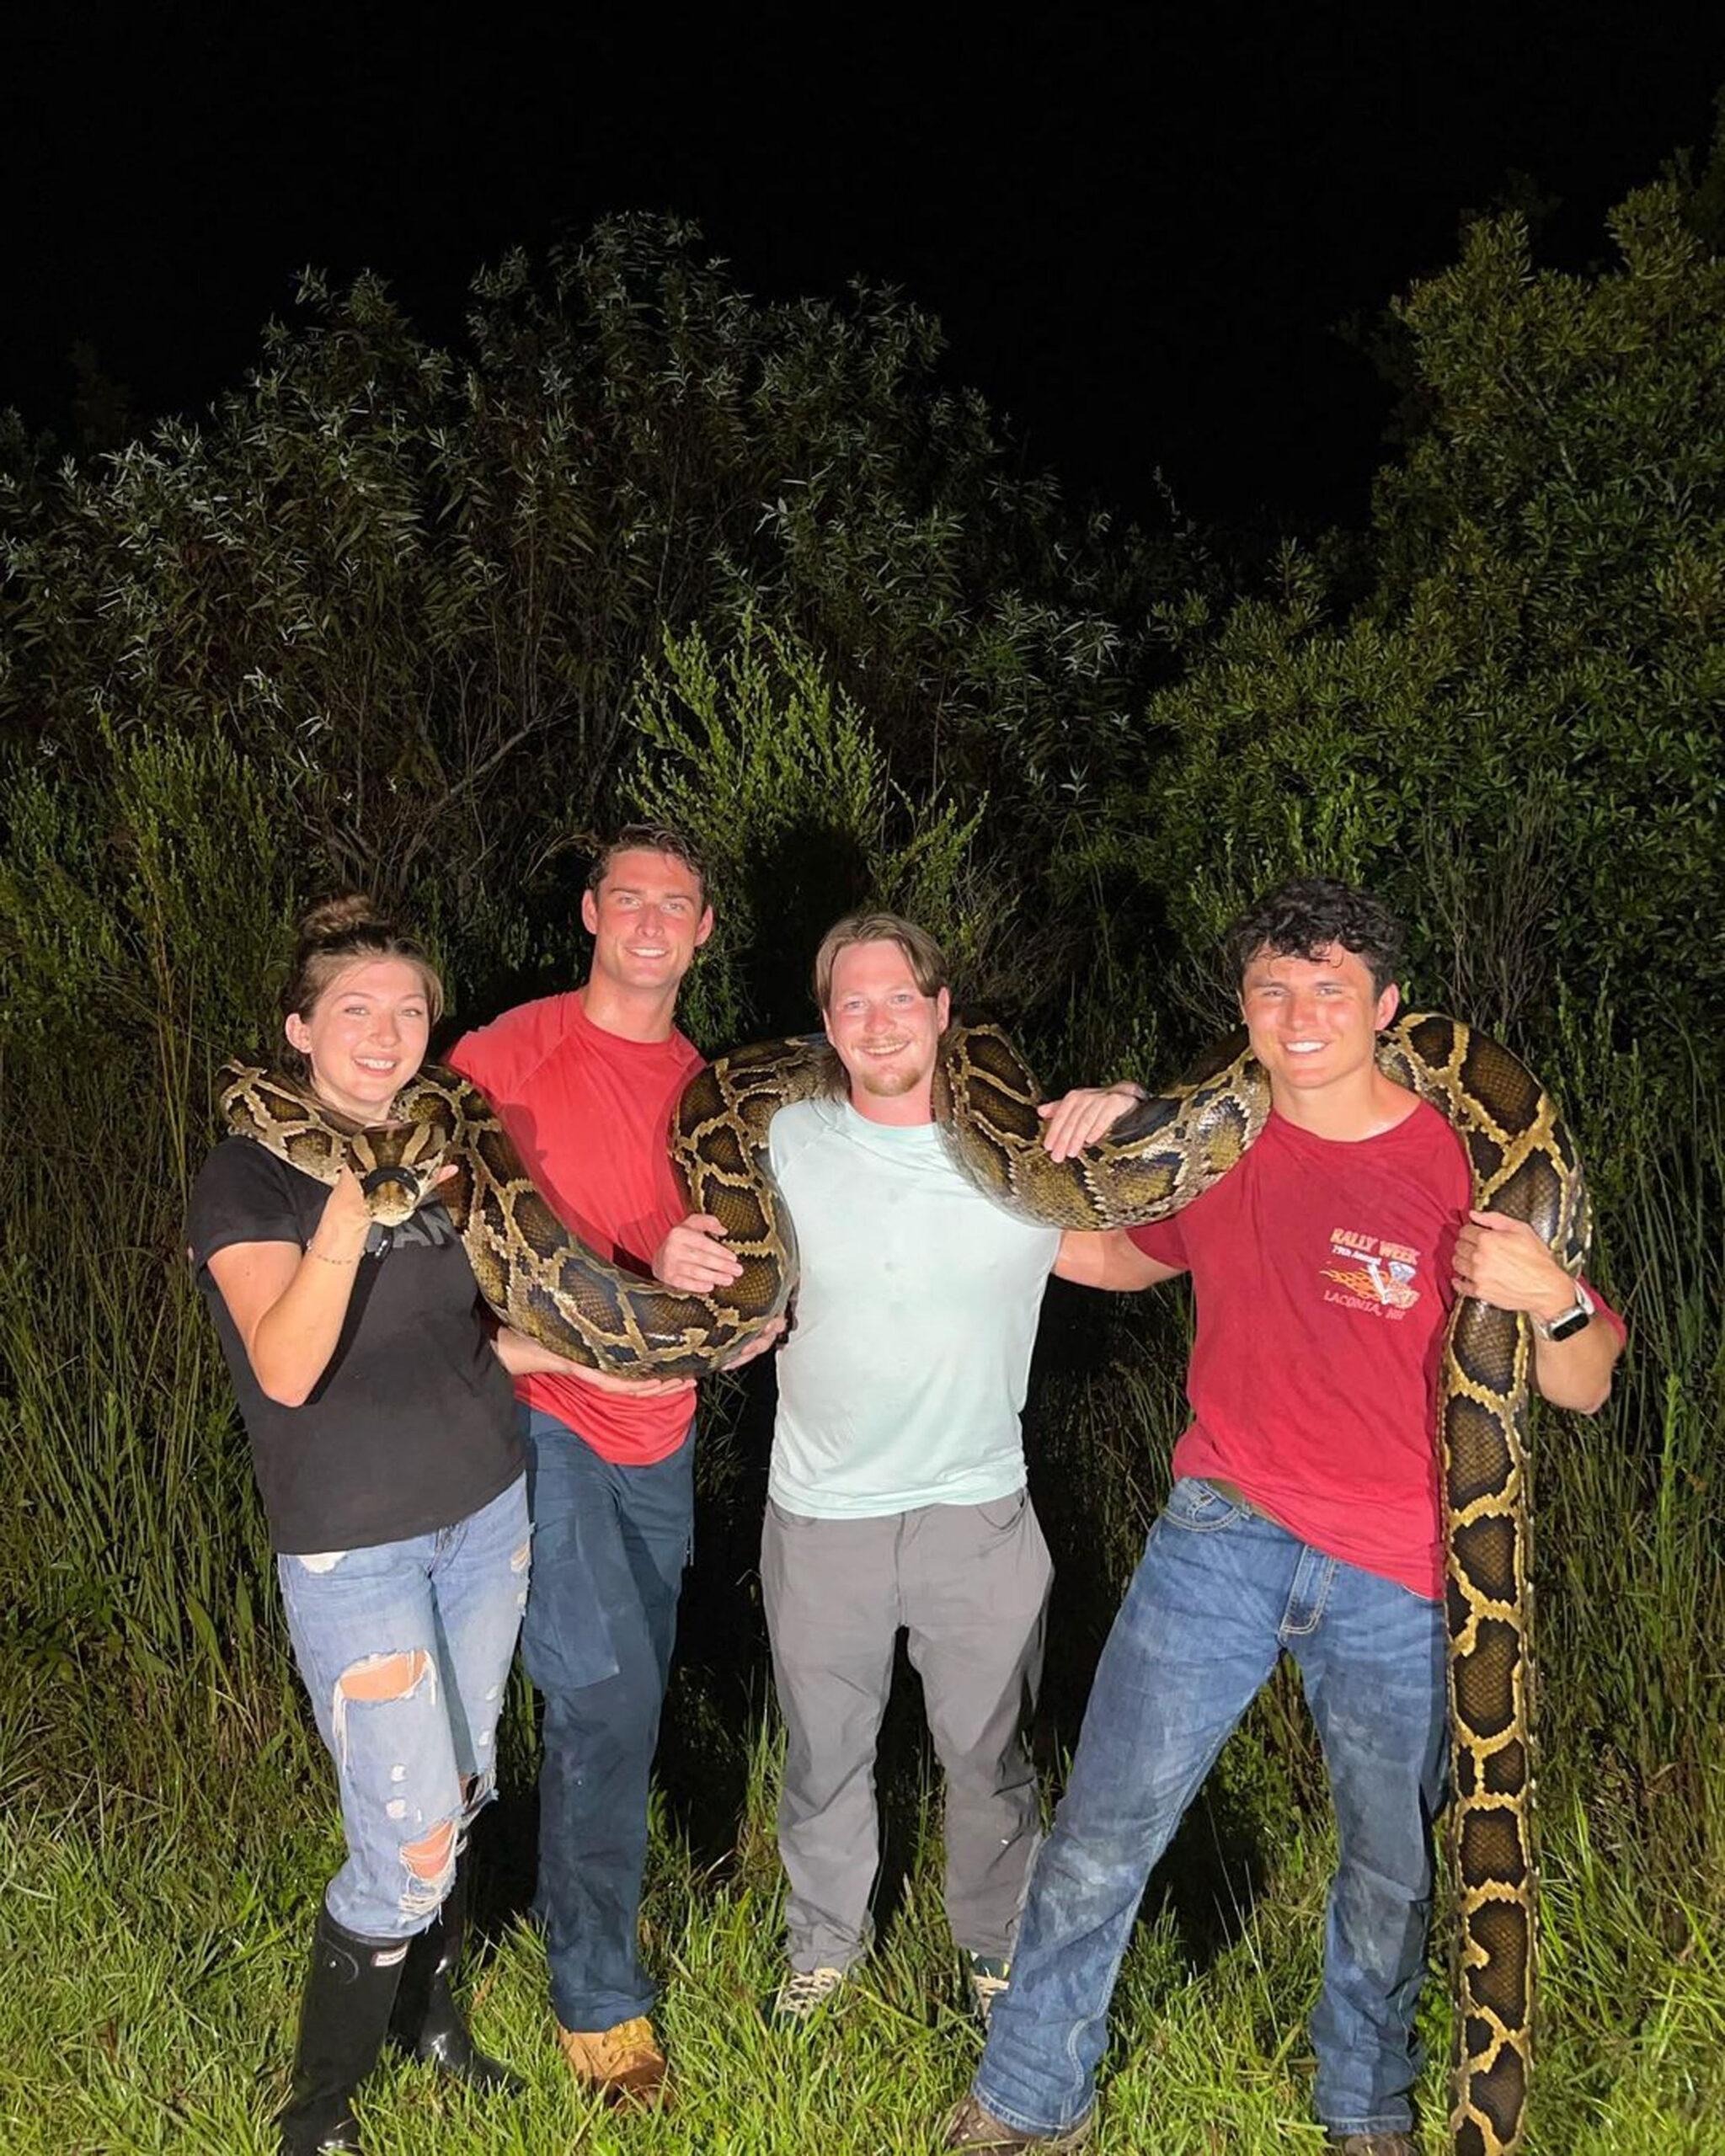 Python hunters show off record-breaking 19-foot Burmese python - the longest ever caught in Florida